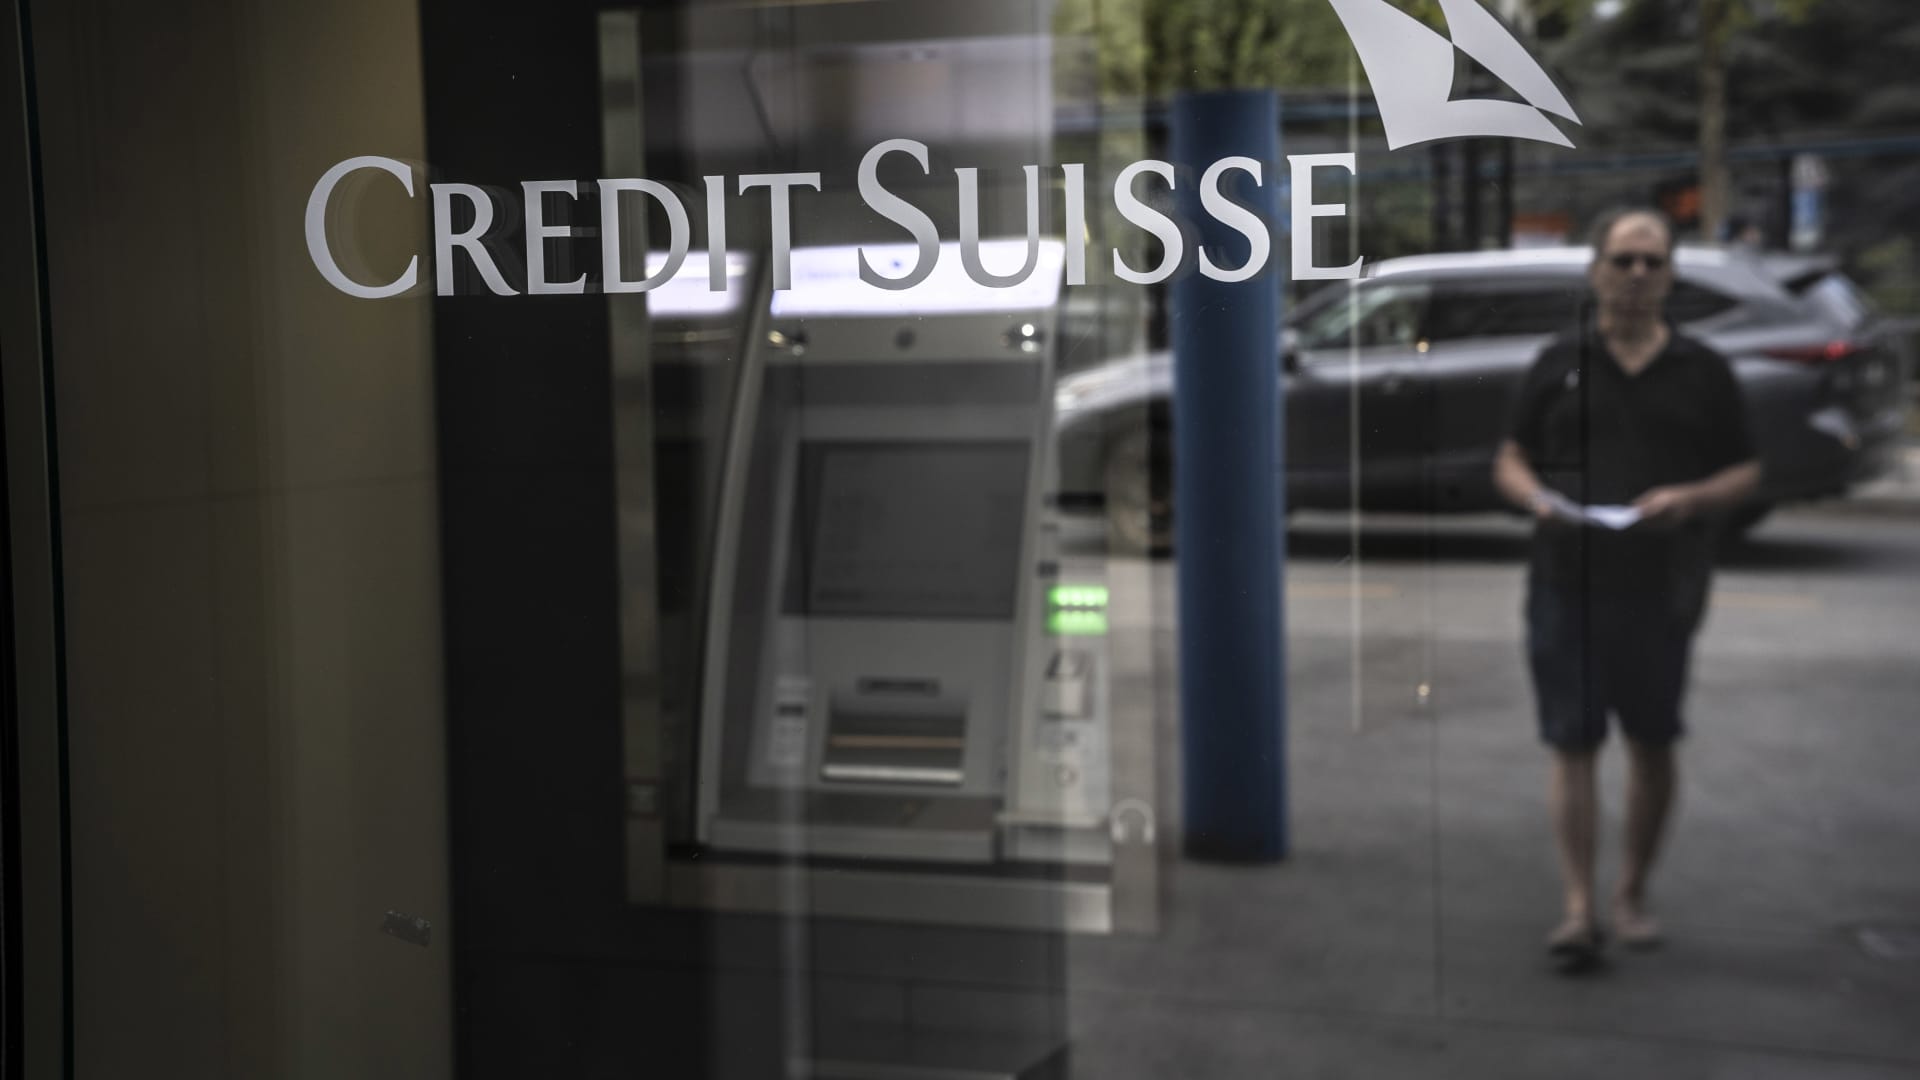 UBS offers to buy Credit Suisse for ‘substantially’ more than $1 billion, sources say